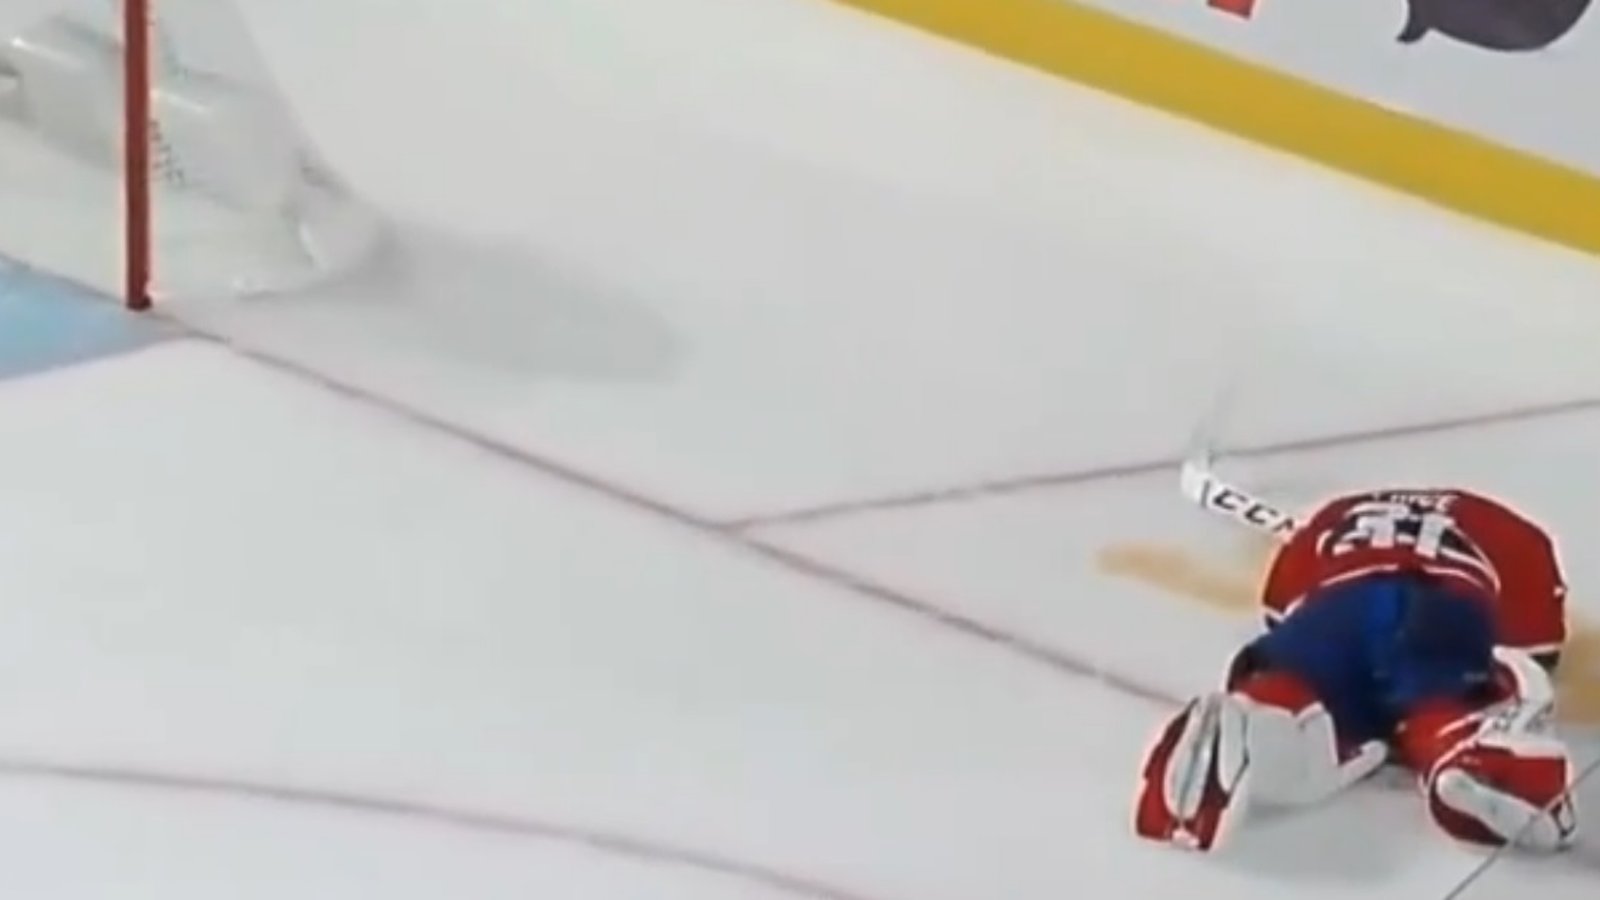 Carey Price makes one of the worst plays of his NHL career in the final game of the preseason.